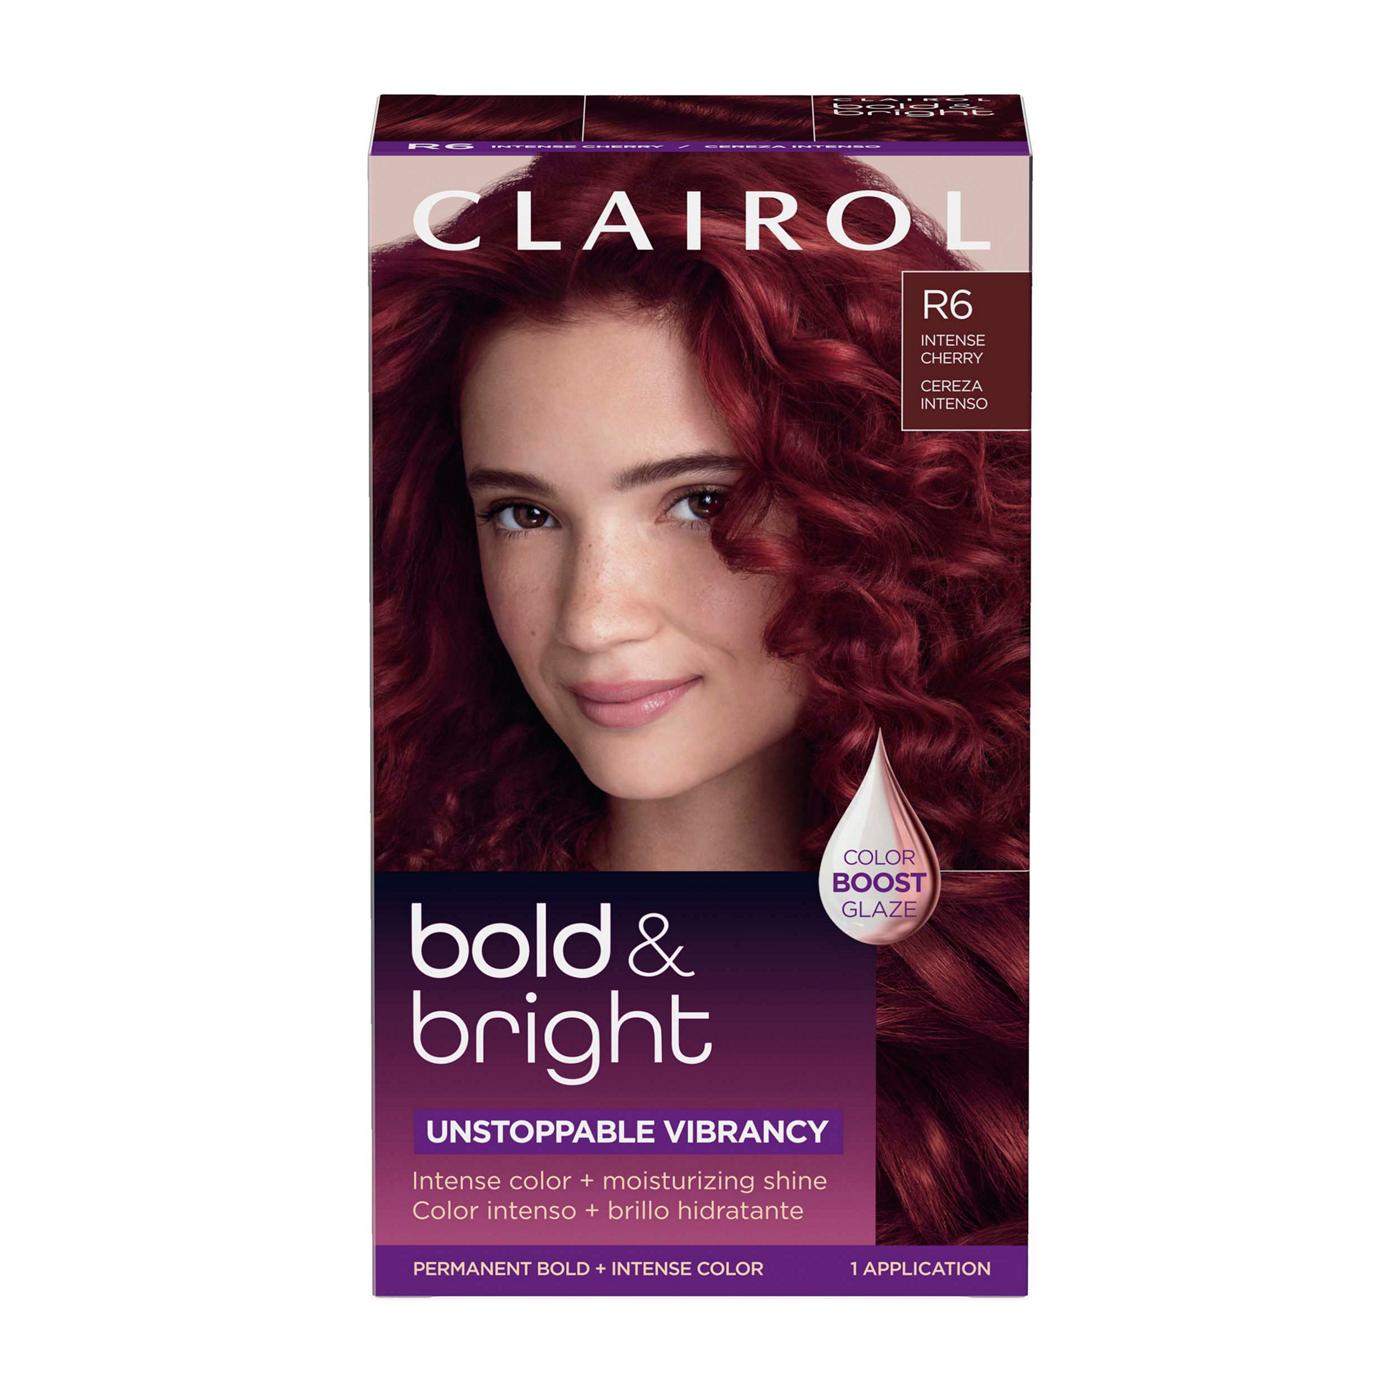 Clairol Bold & Bright Permanent Hair Color - R6 Intense Cherry; image 1 of 11